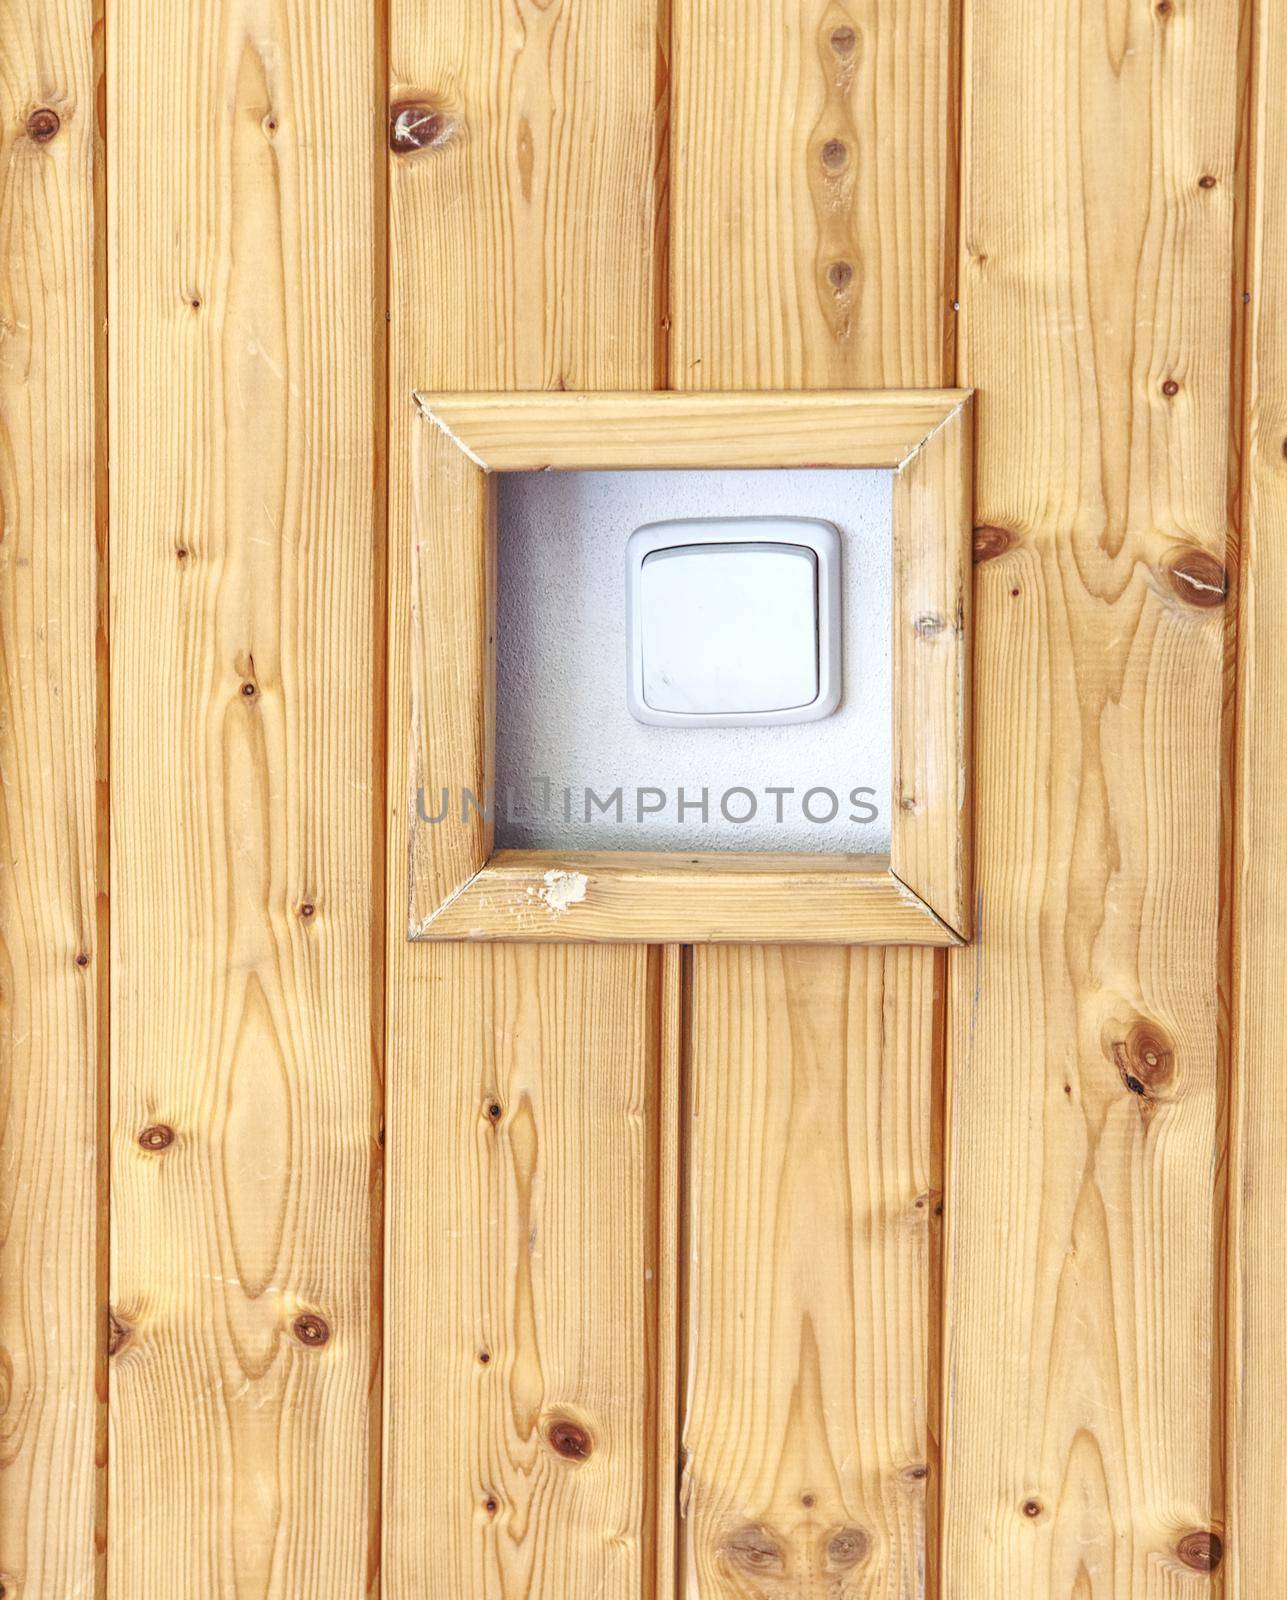 White switcher on wall. Brown wooden wall with white switch, background. Home interior decor.